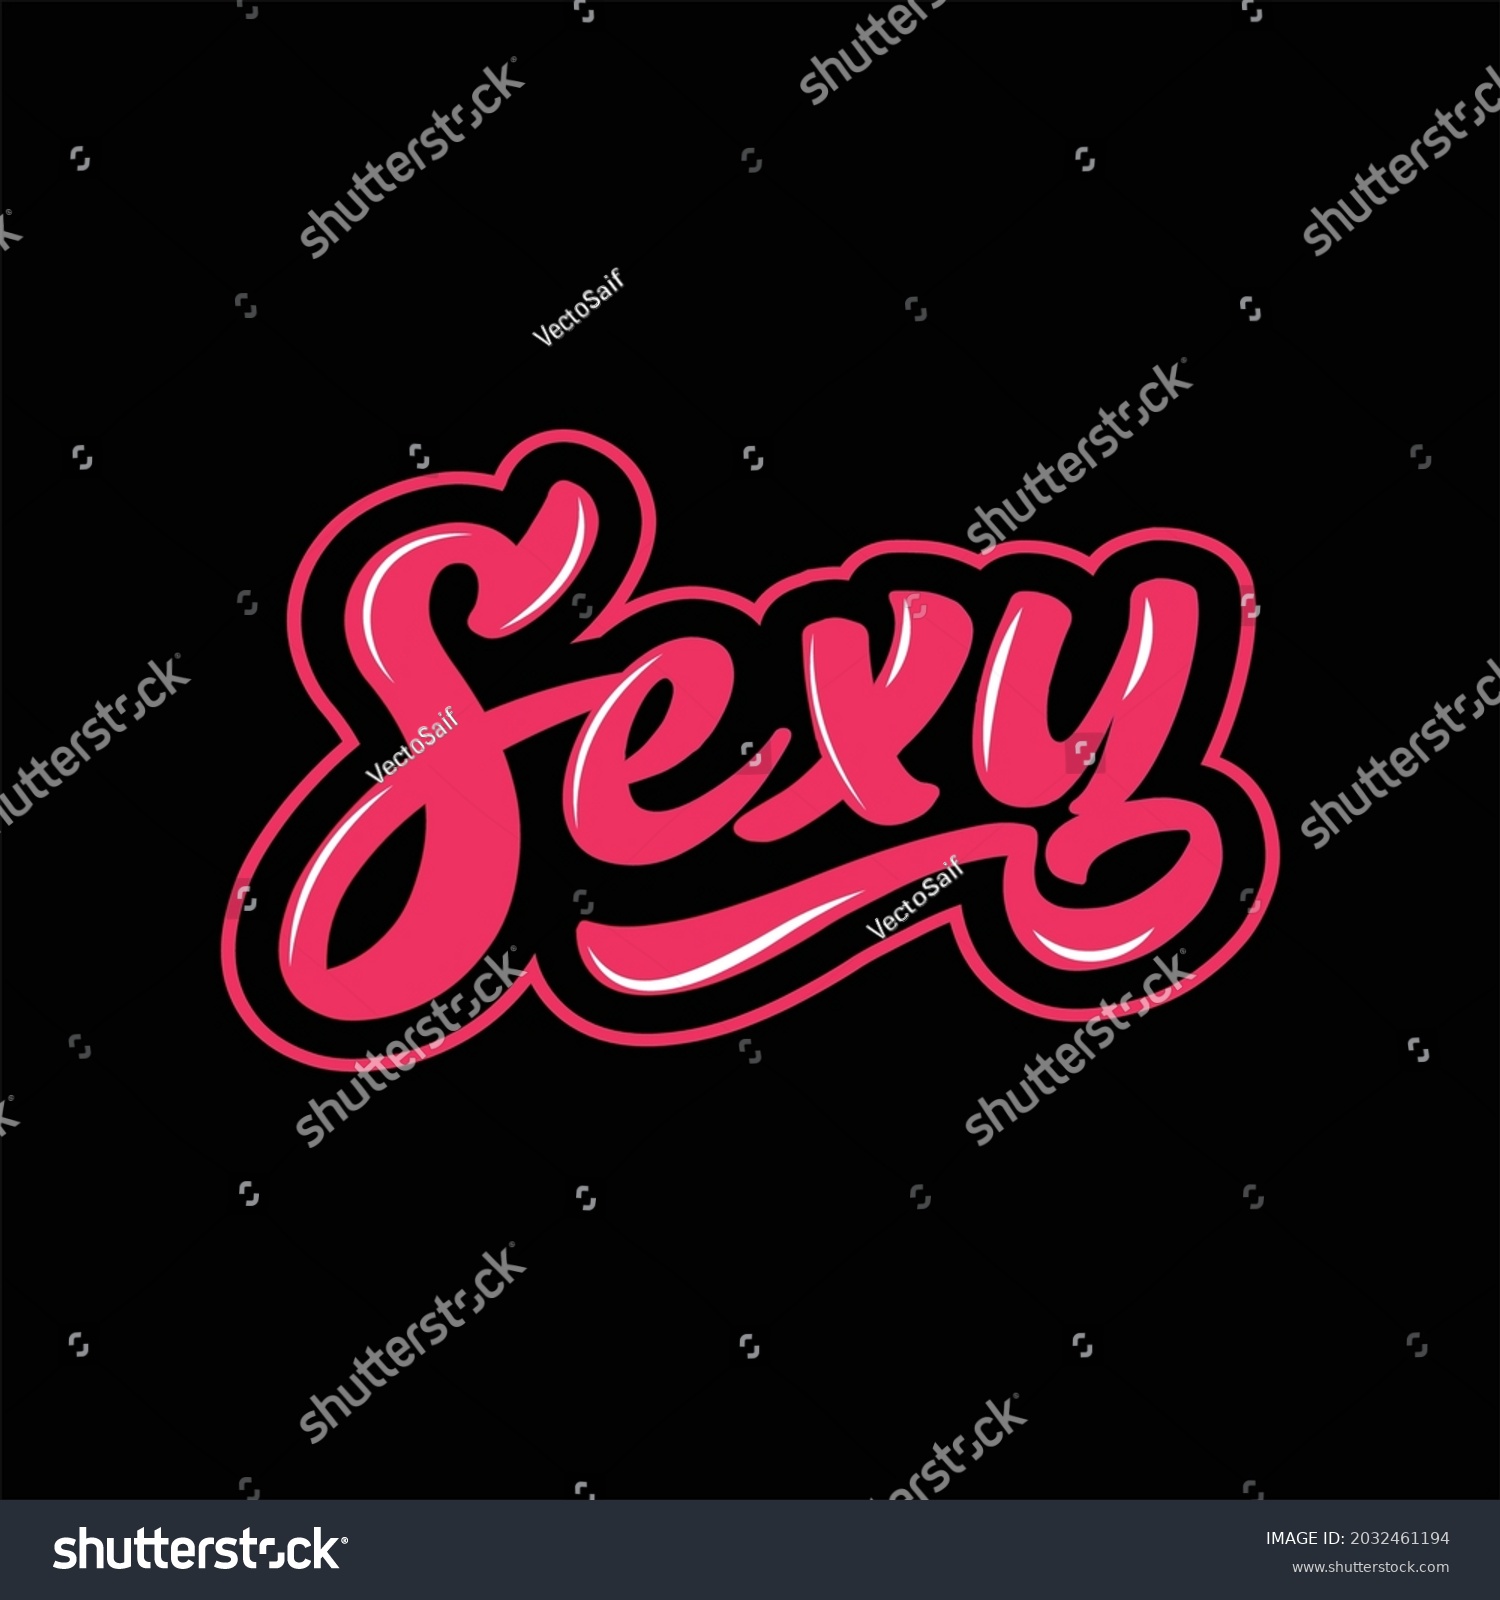 Sexy Word Typography Design Vector Stock Vector Royalty Free 2032461194 Shutterstock